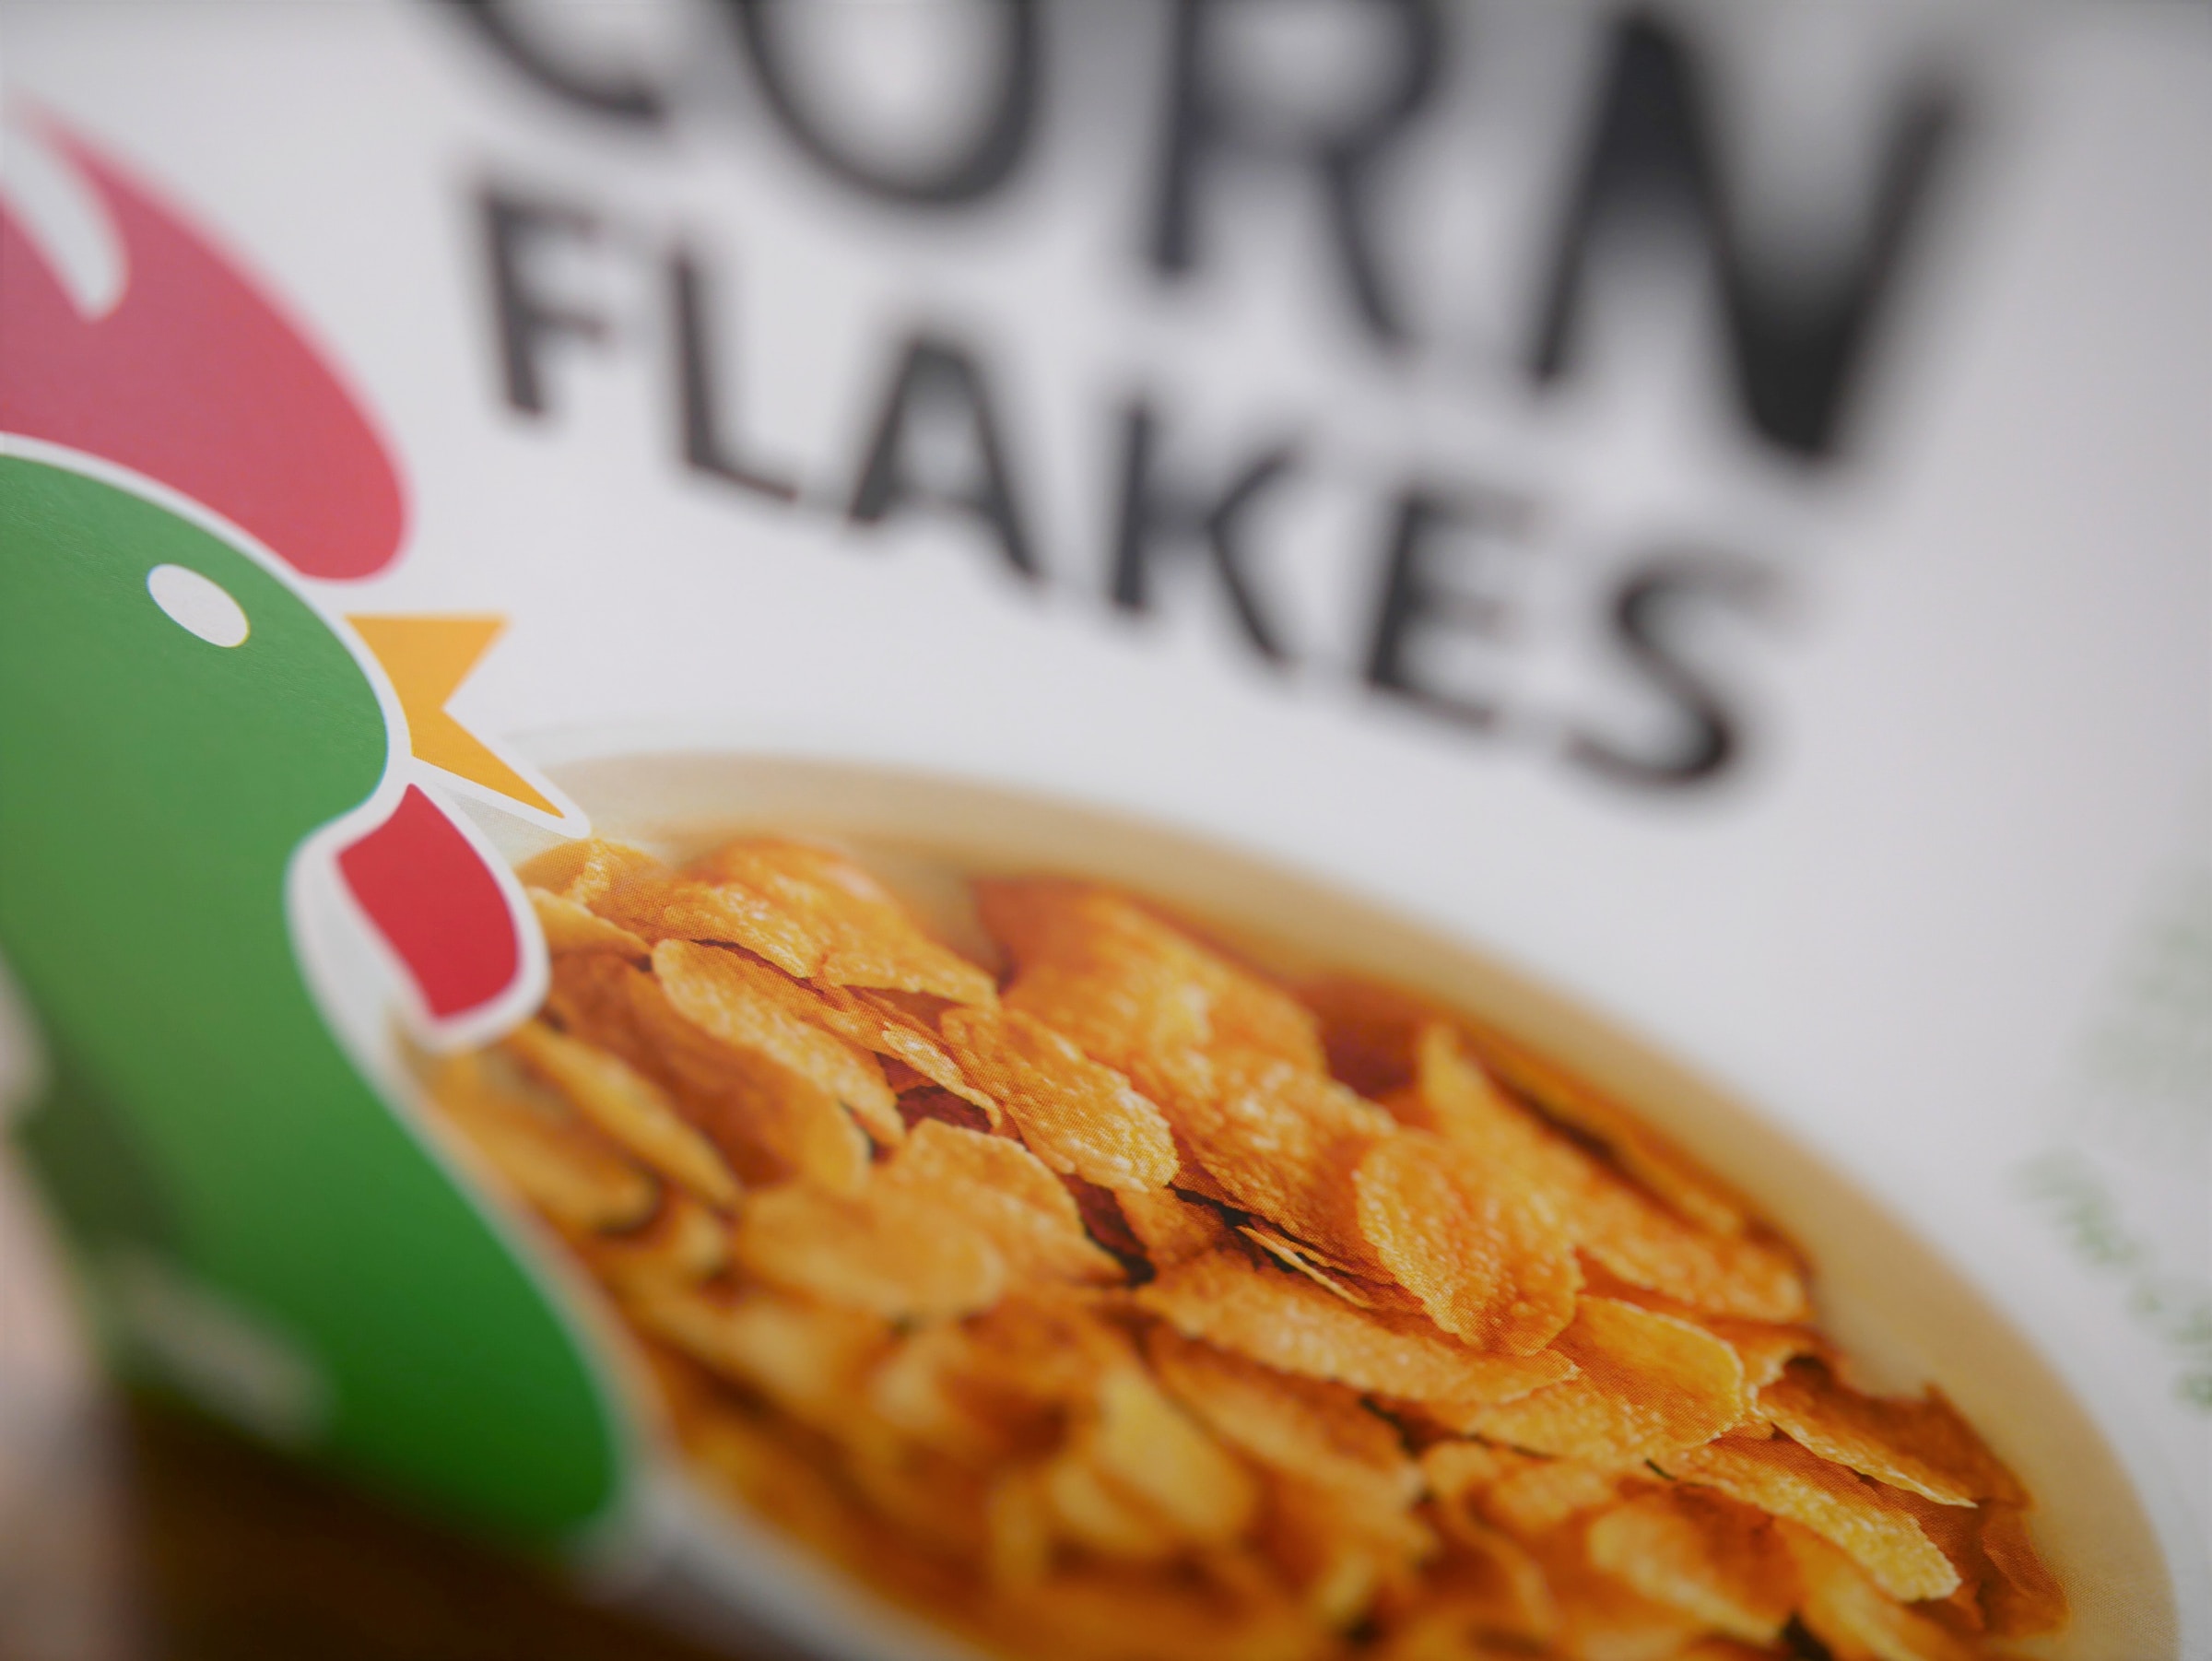 Kellogg’s to Use Hydrogen to Cut its Carbon Emissions